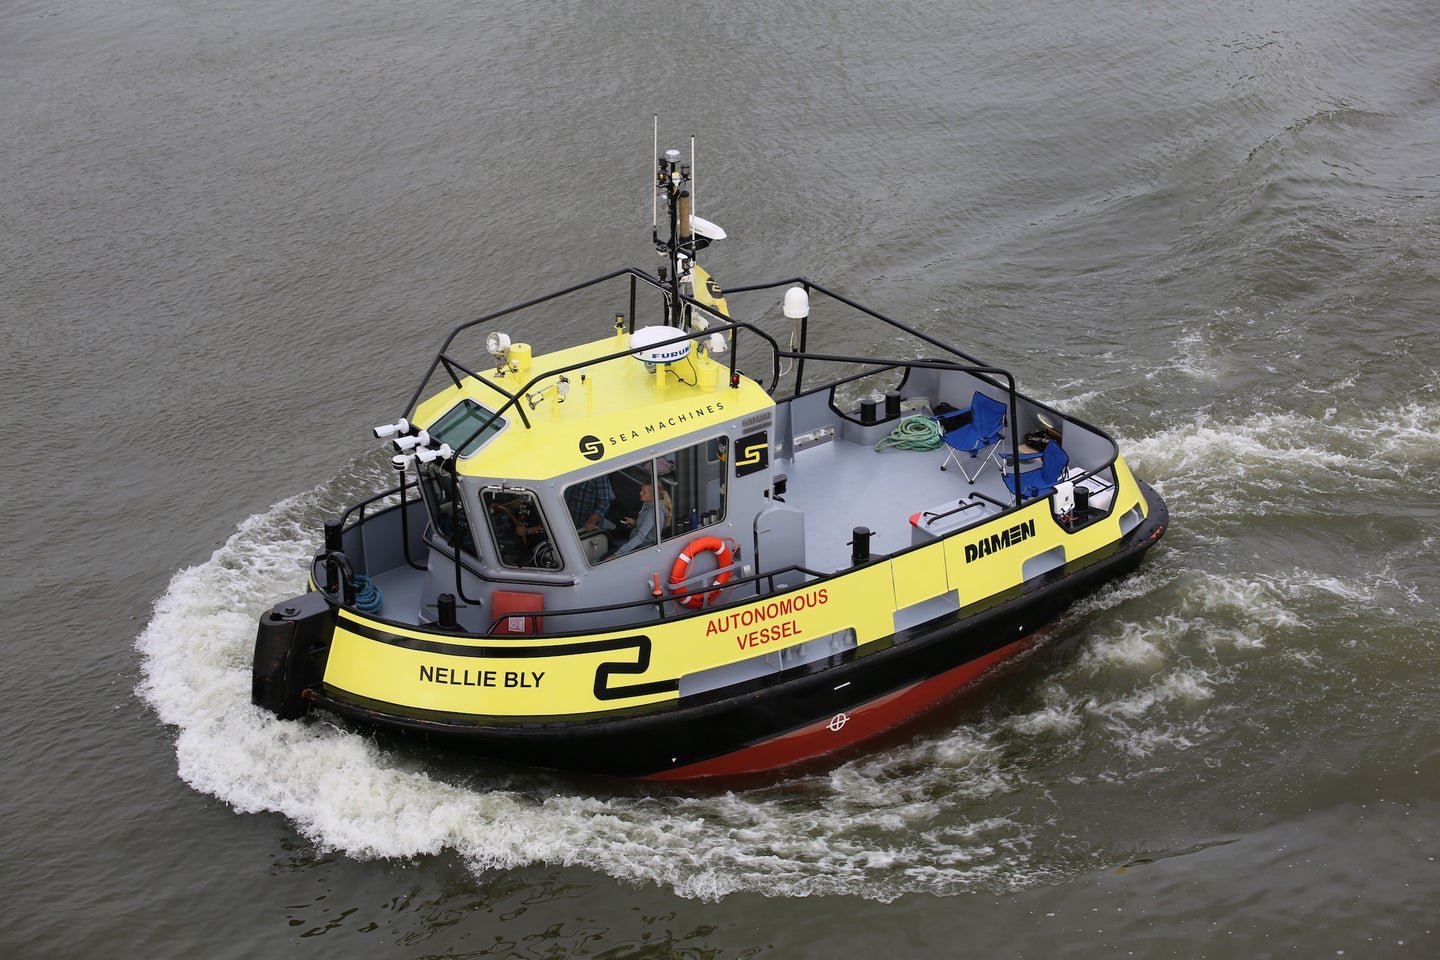 This smart tugboat is about to journey more than 1,000 miles, autonomously